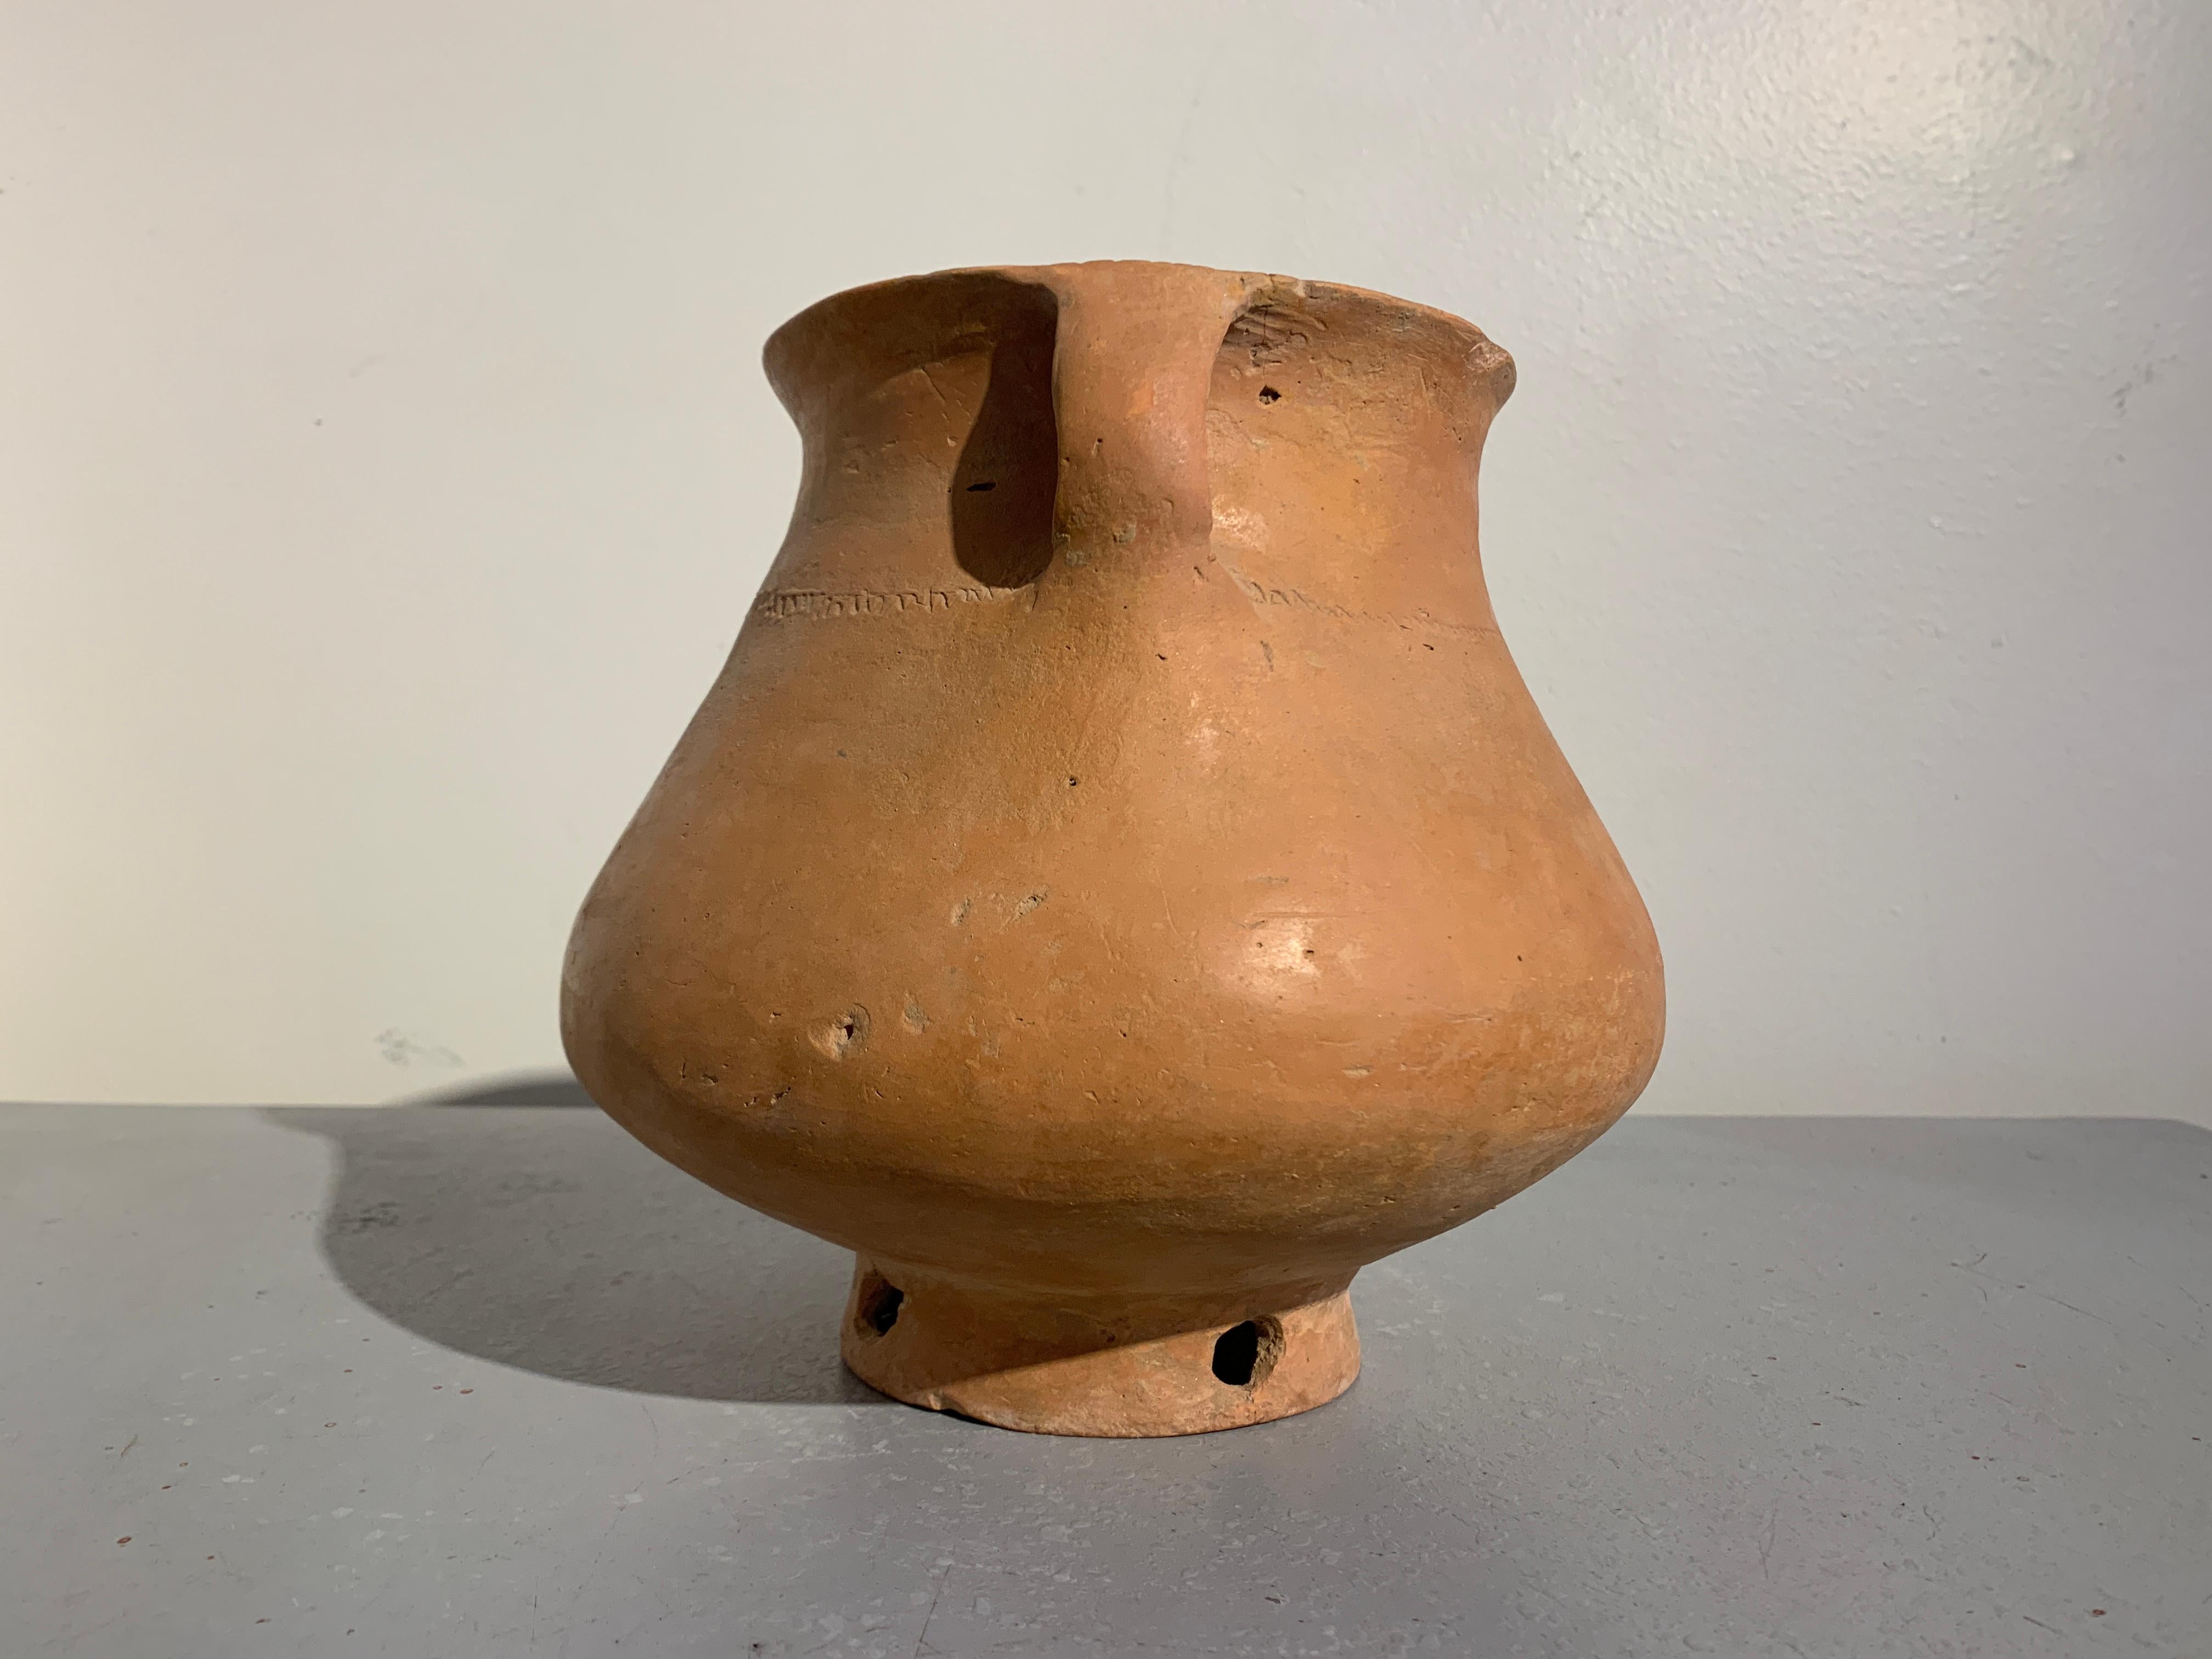 An attractive Neolithic Chinese burnished red pottery vessel, Qijia Culture (2200 BC - 1600 BC), modern day Gansu Province, China.

The vessel of compressed globular form set on a short, pieced pedestal foot, and featuring two ear handles, a short,